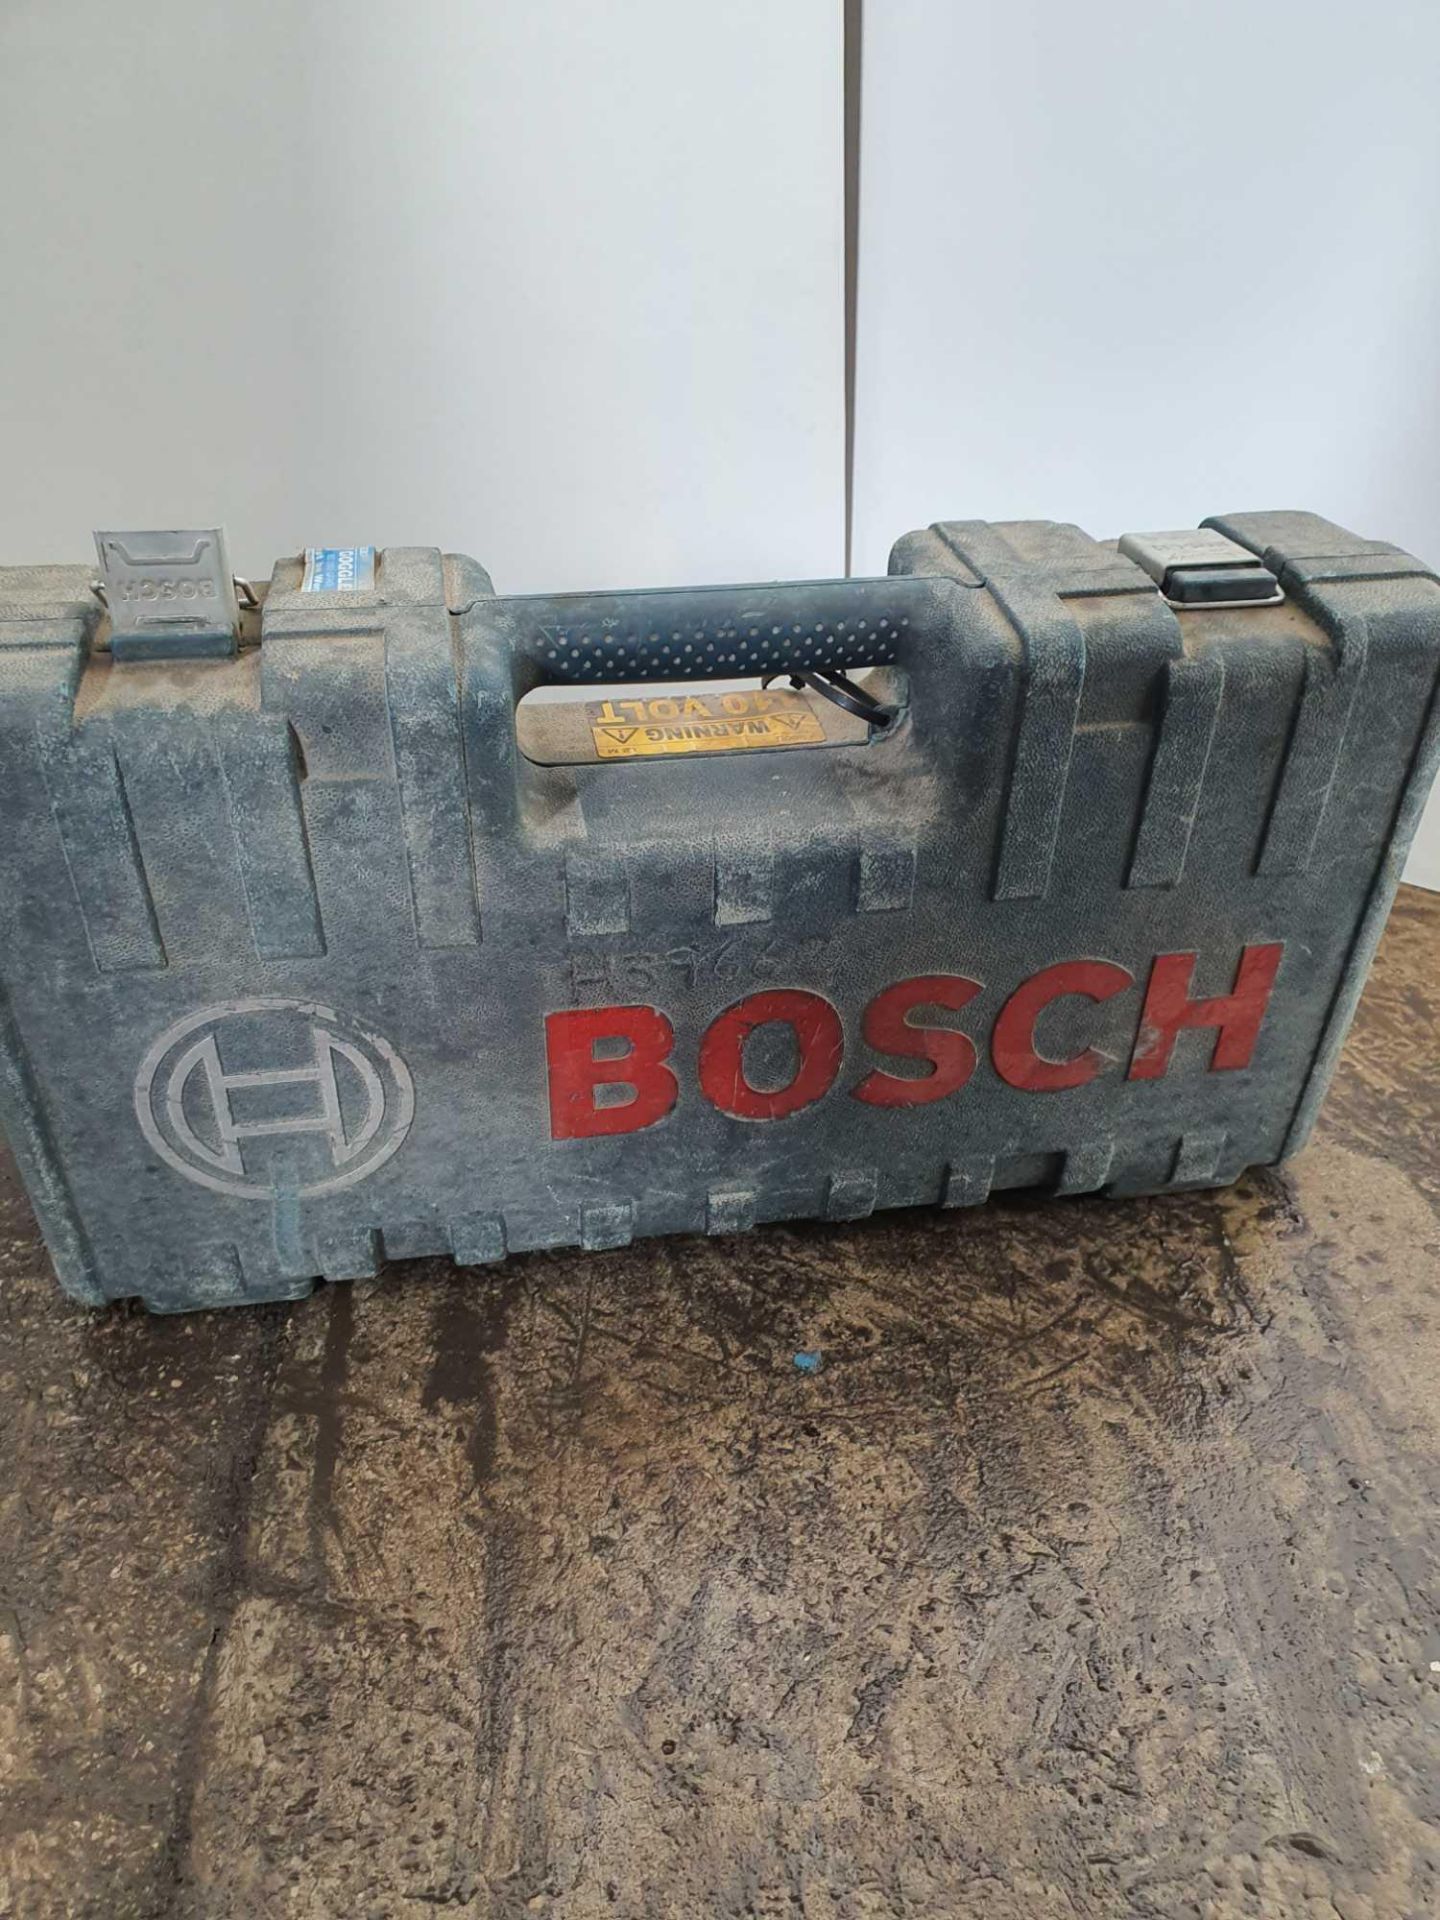 Bosch 110v risipracting saw